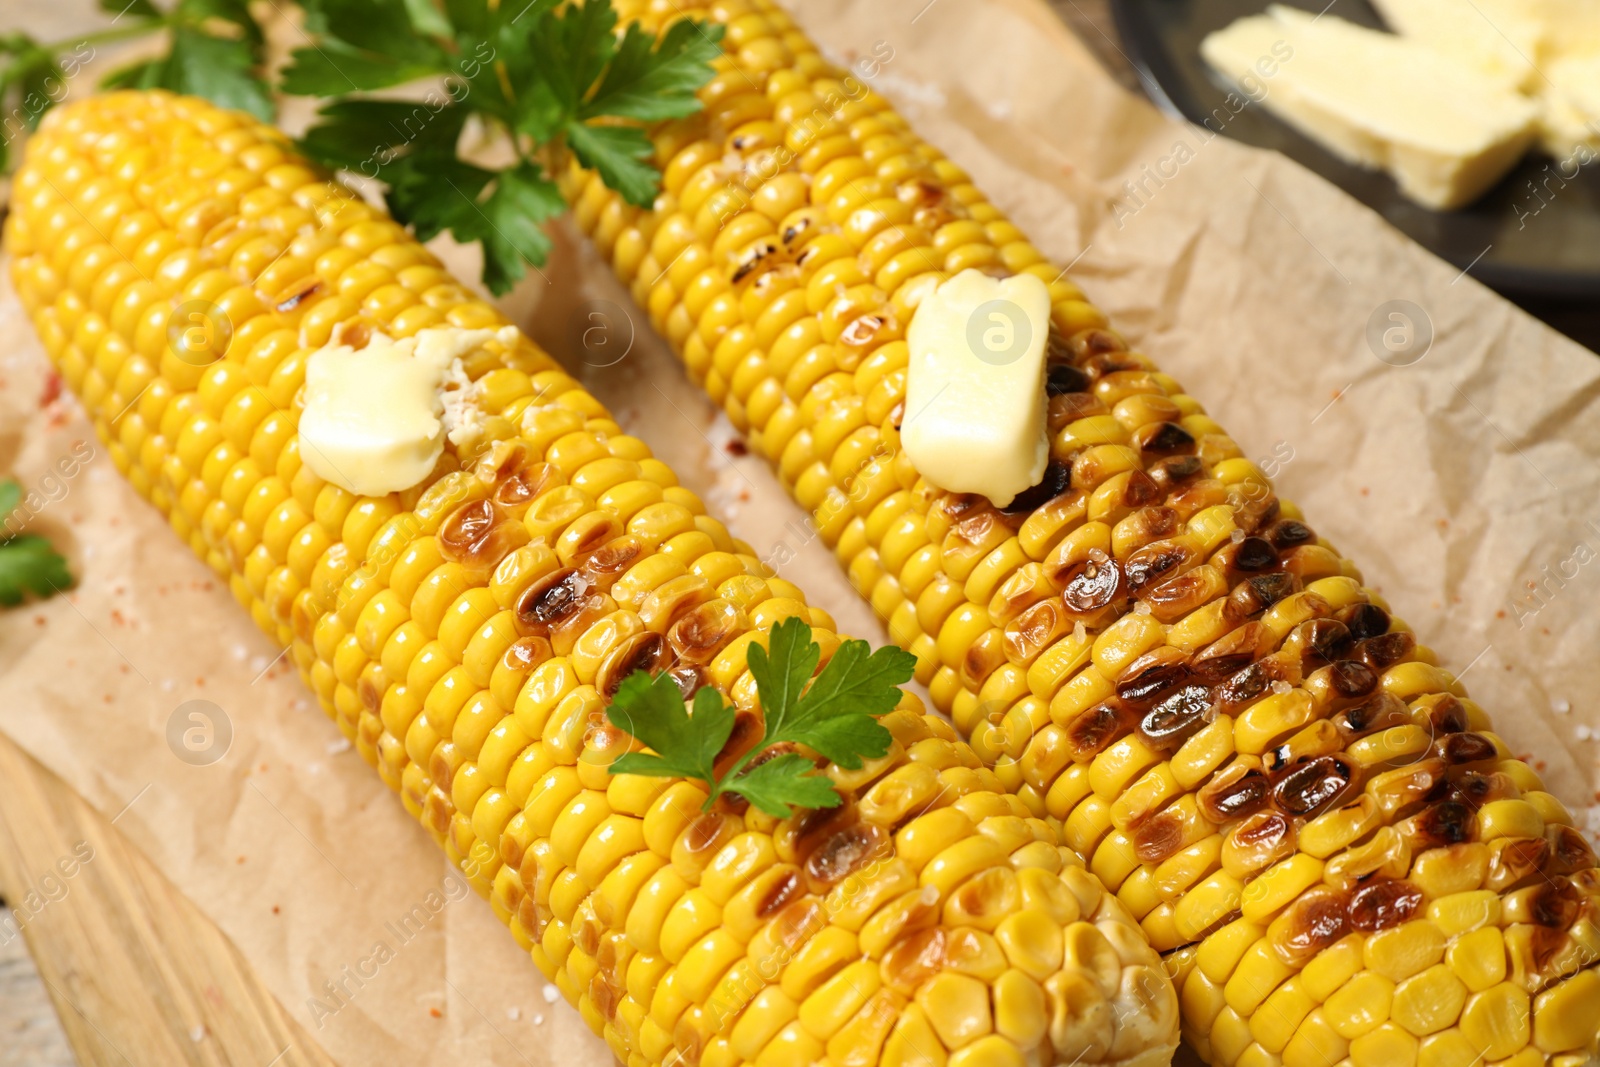 Photo of Tasty grilled corn on parchment, closeup view